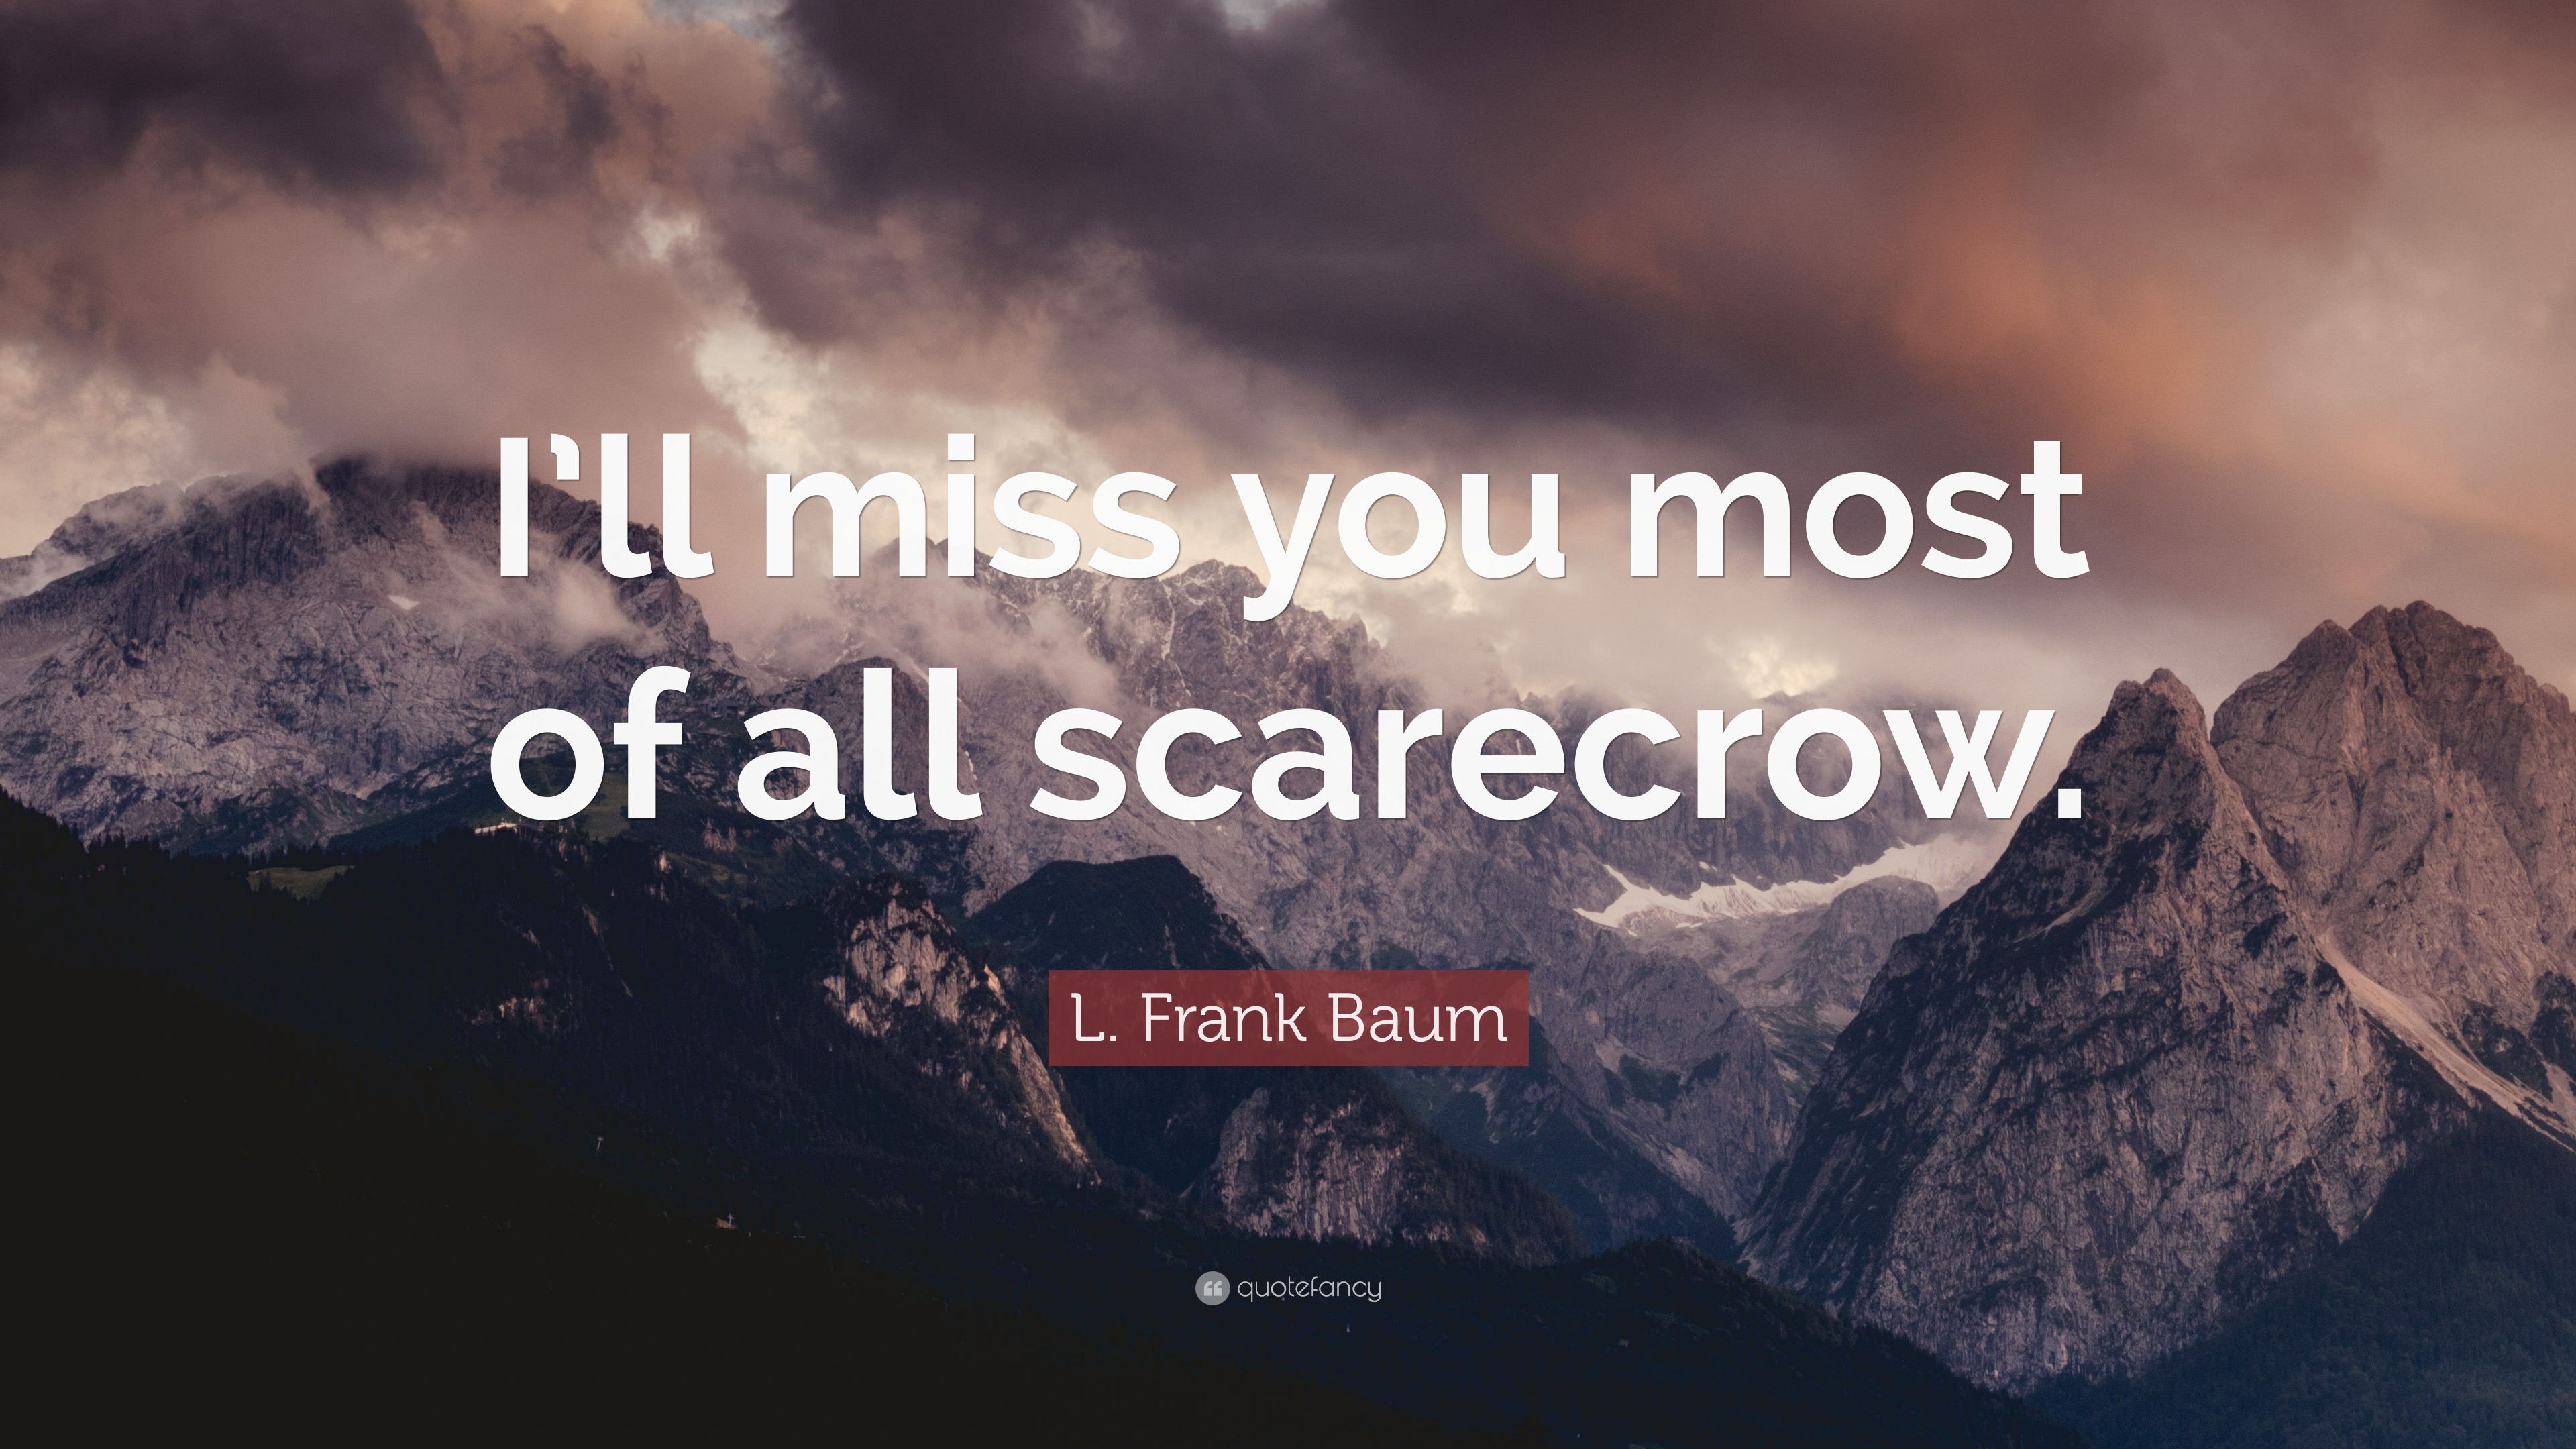 L. Frank Baum Quote: “I’ll miss you most of all scarecrow.”